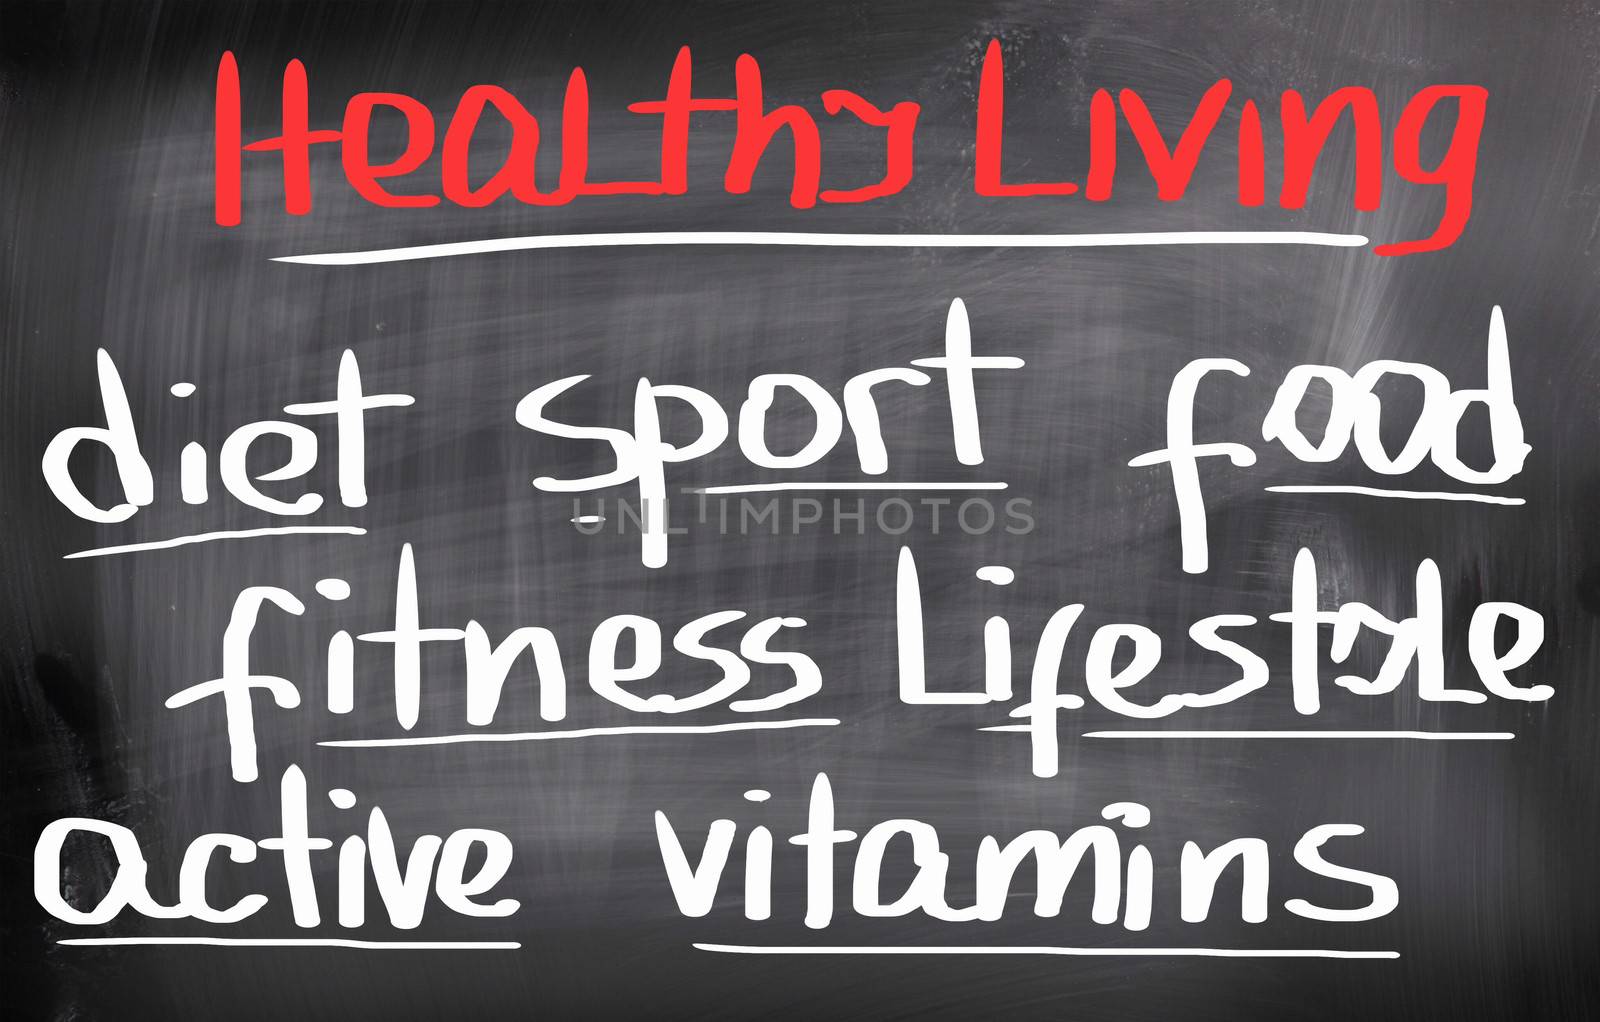 Healthy Living Concept